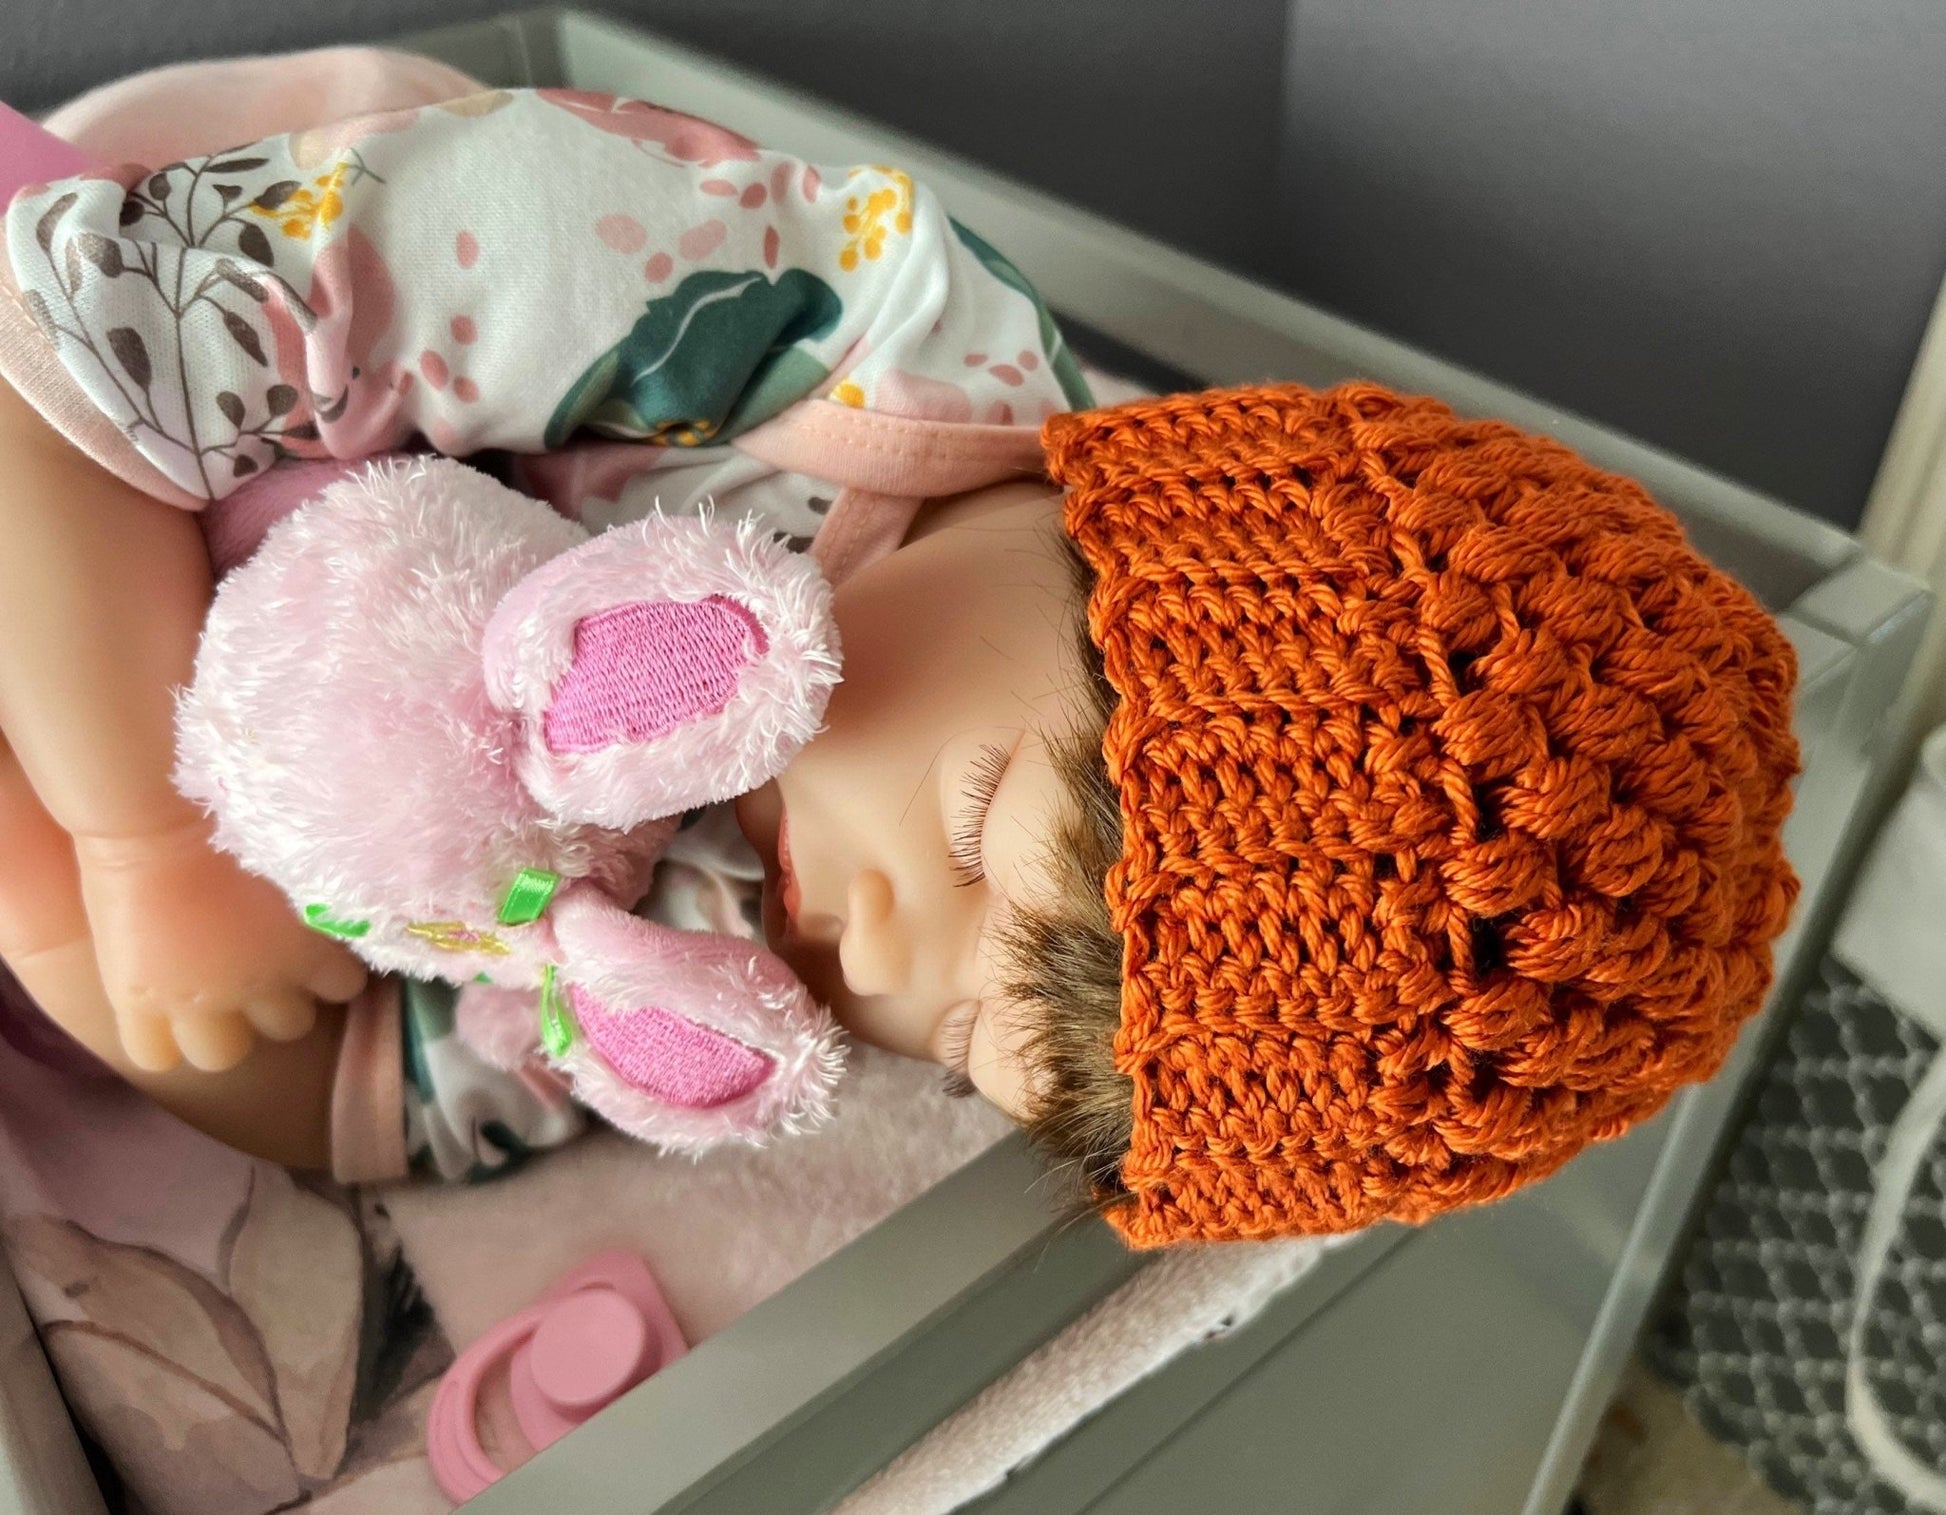 Hat for baby in pumpkin spice or orange color hat, handmade crochet fall hat, various sizes winter hat - Lilly Grace Sparkle Boutique